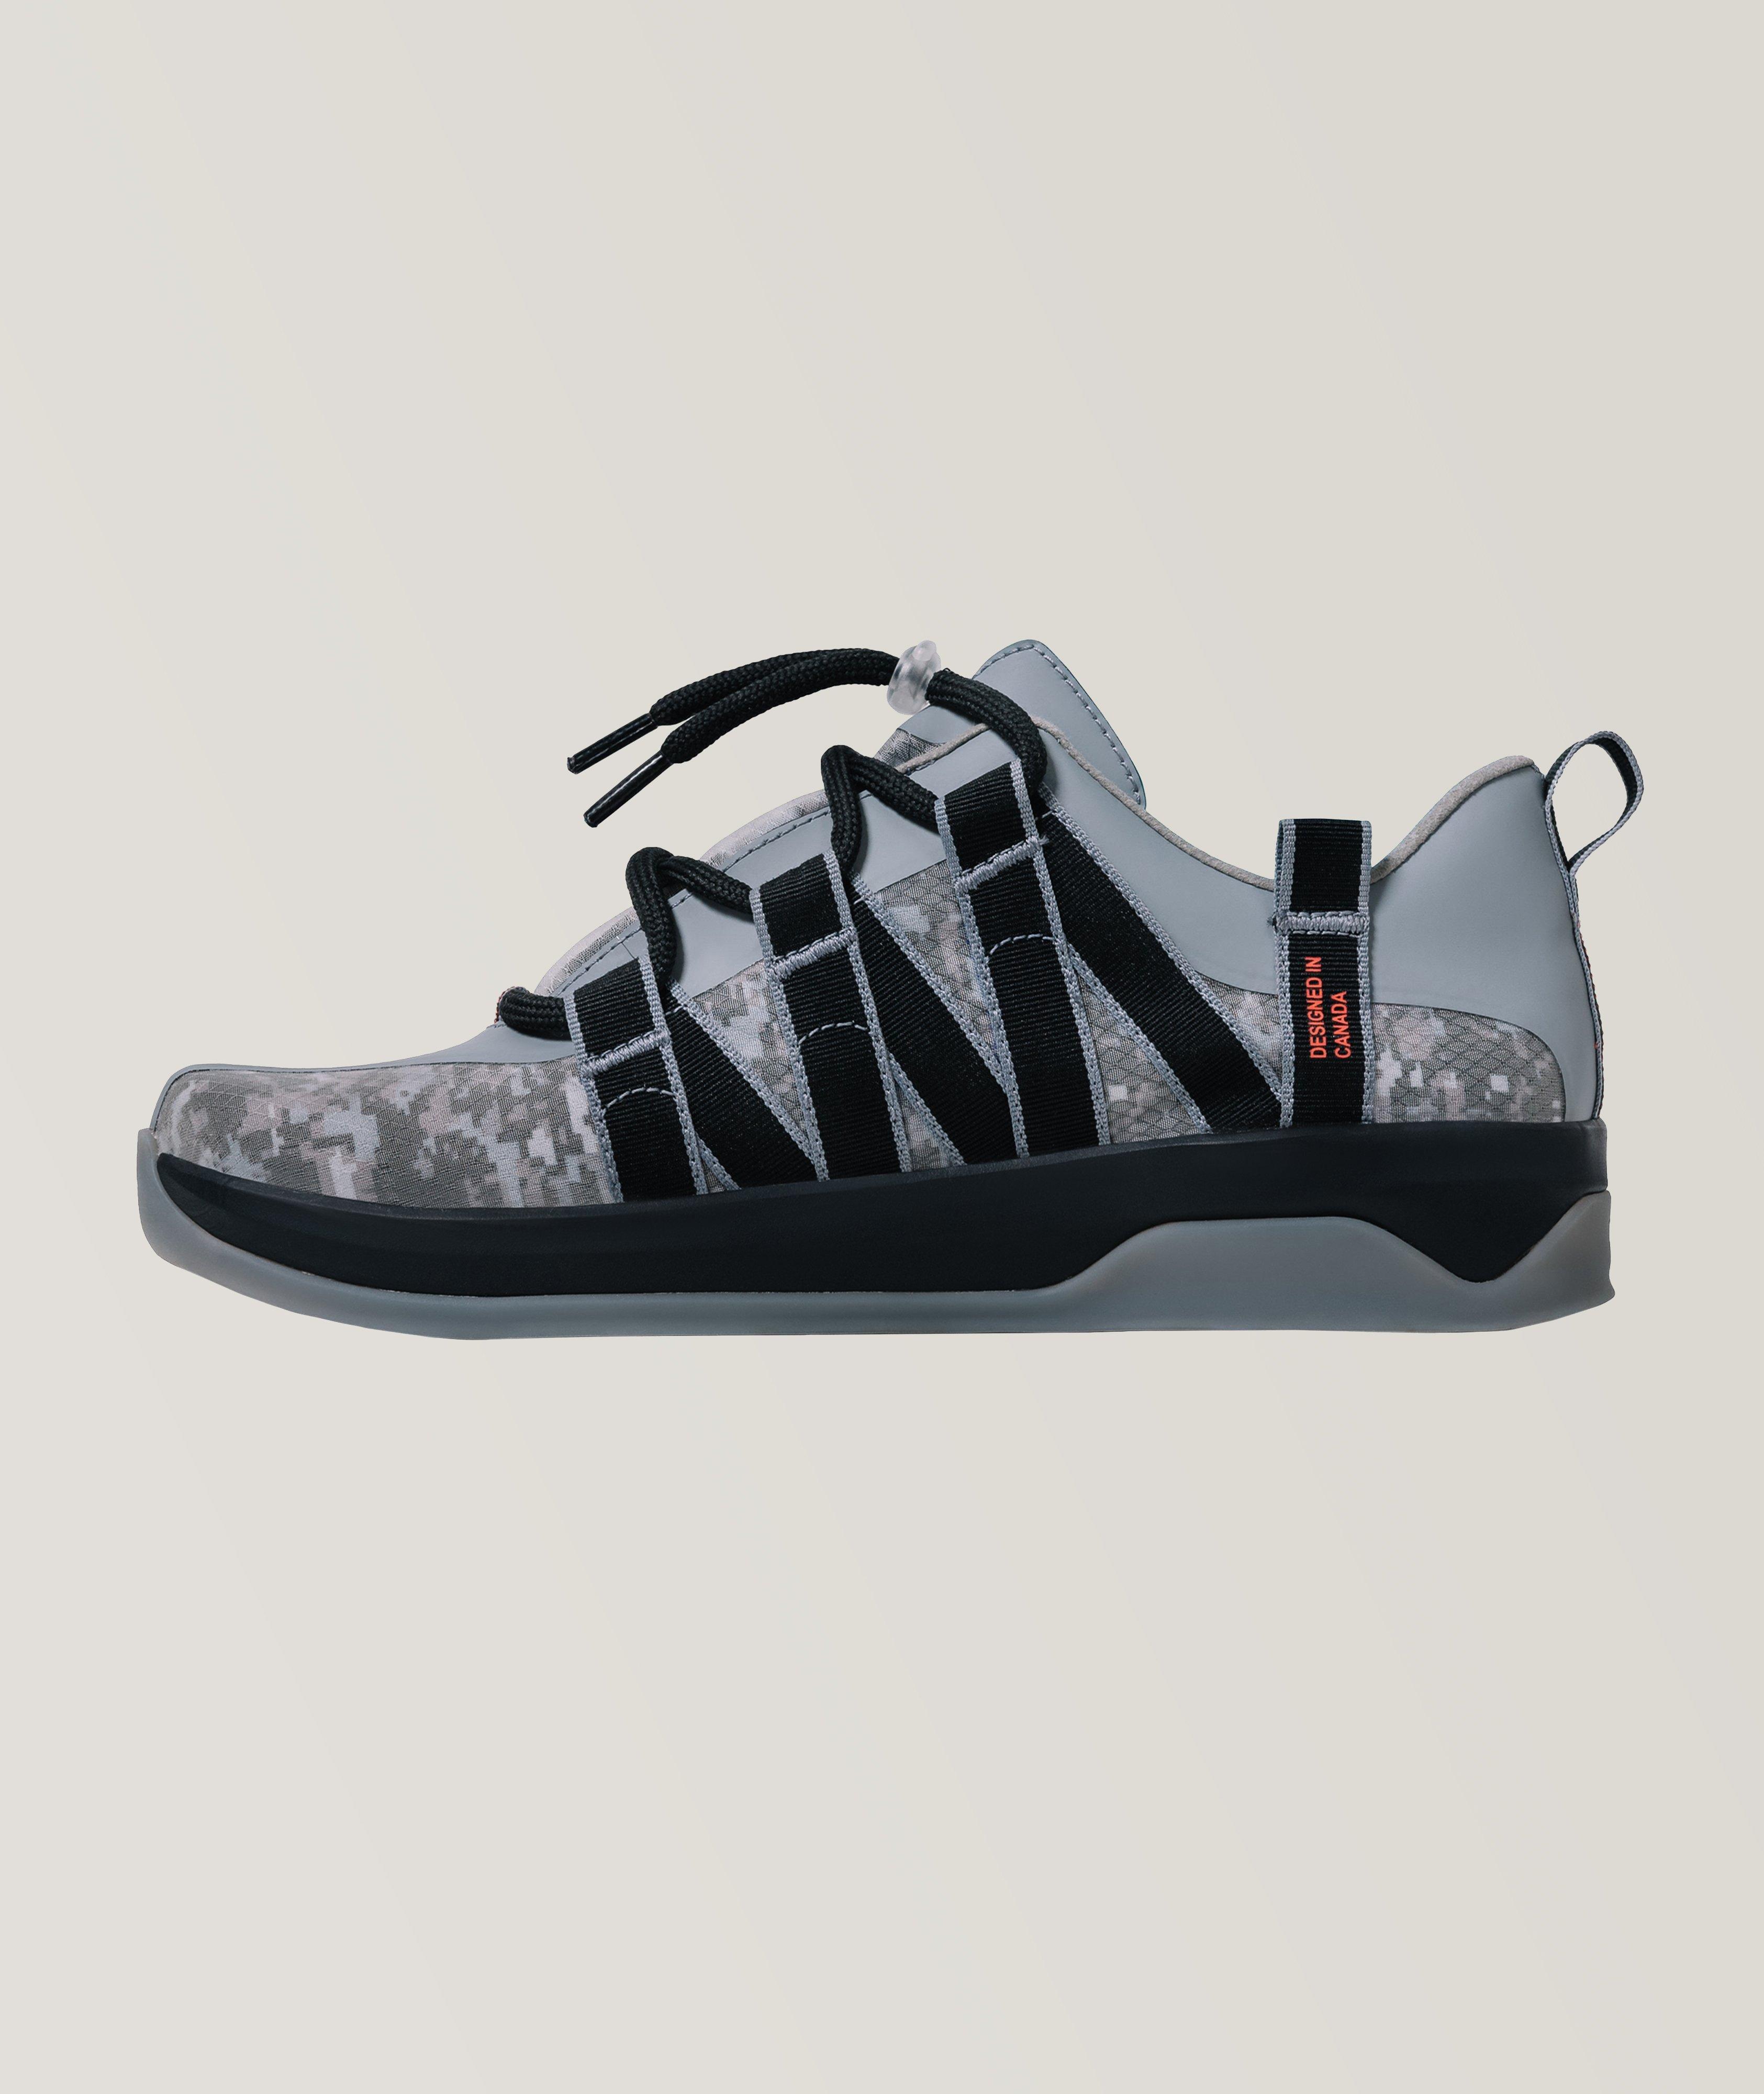 Mobrly 2.0 Sneakers  image 2